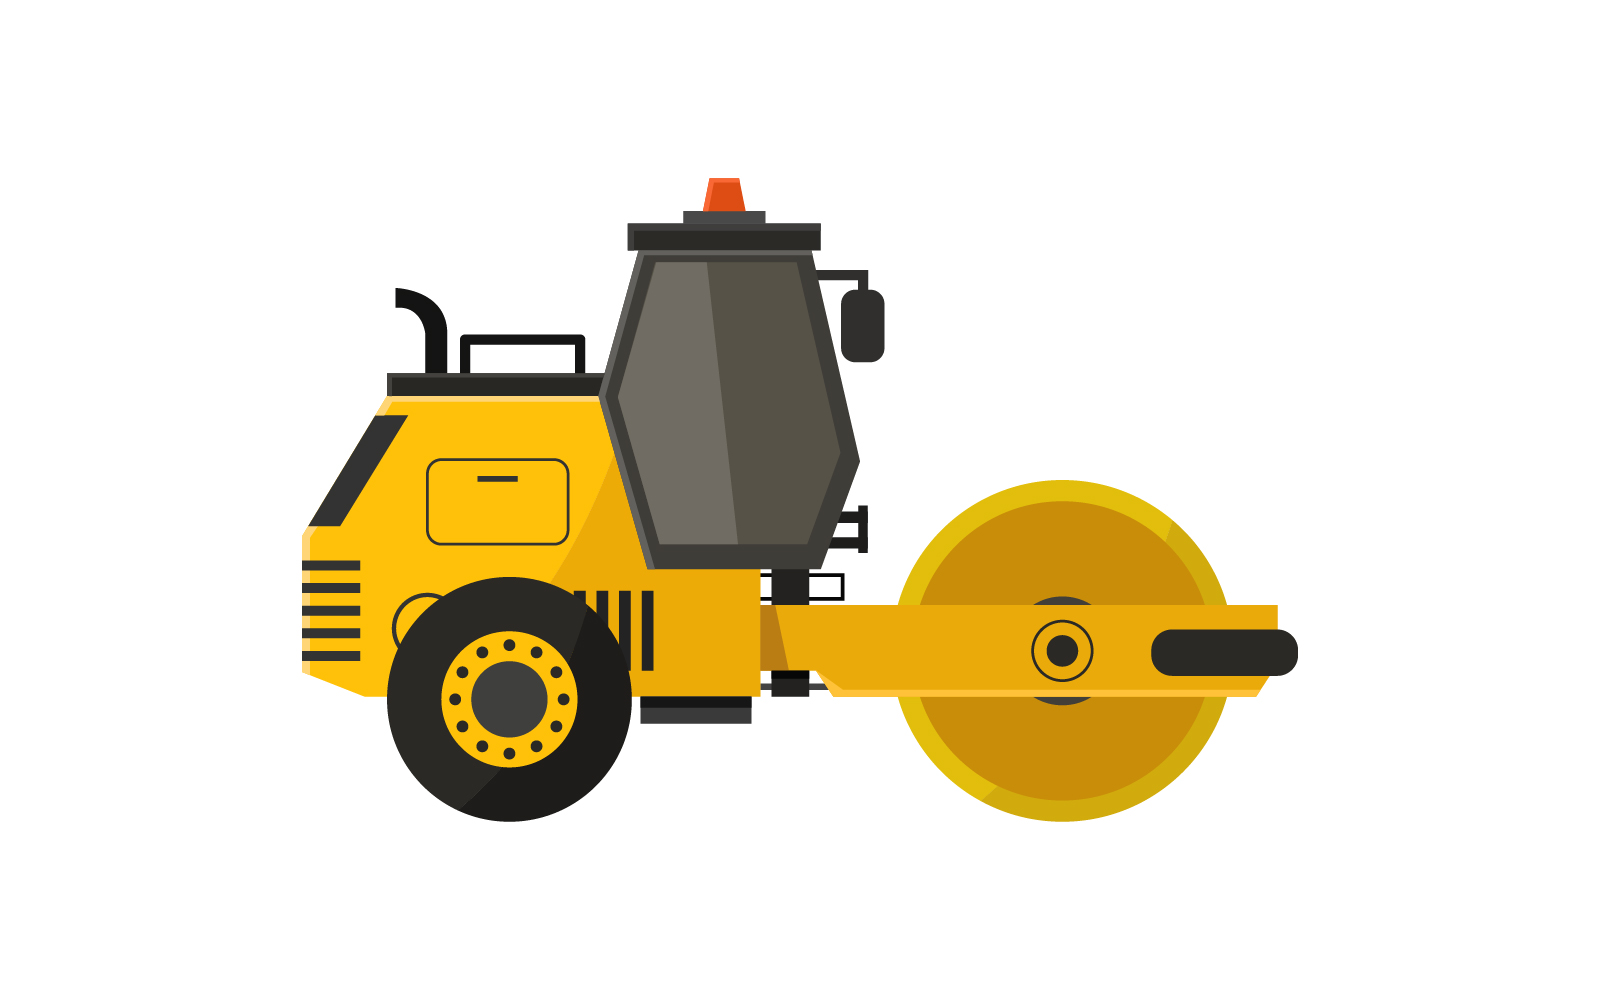 Road roller illustrated on background